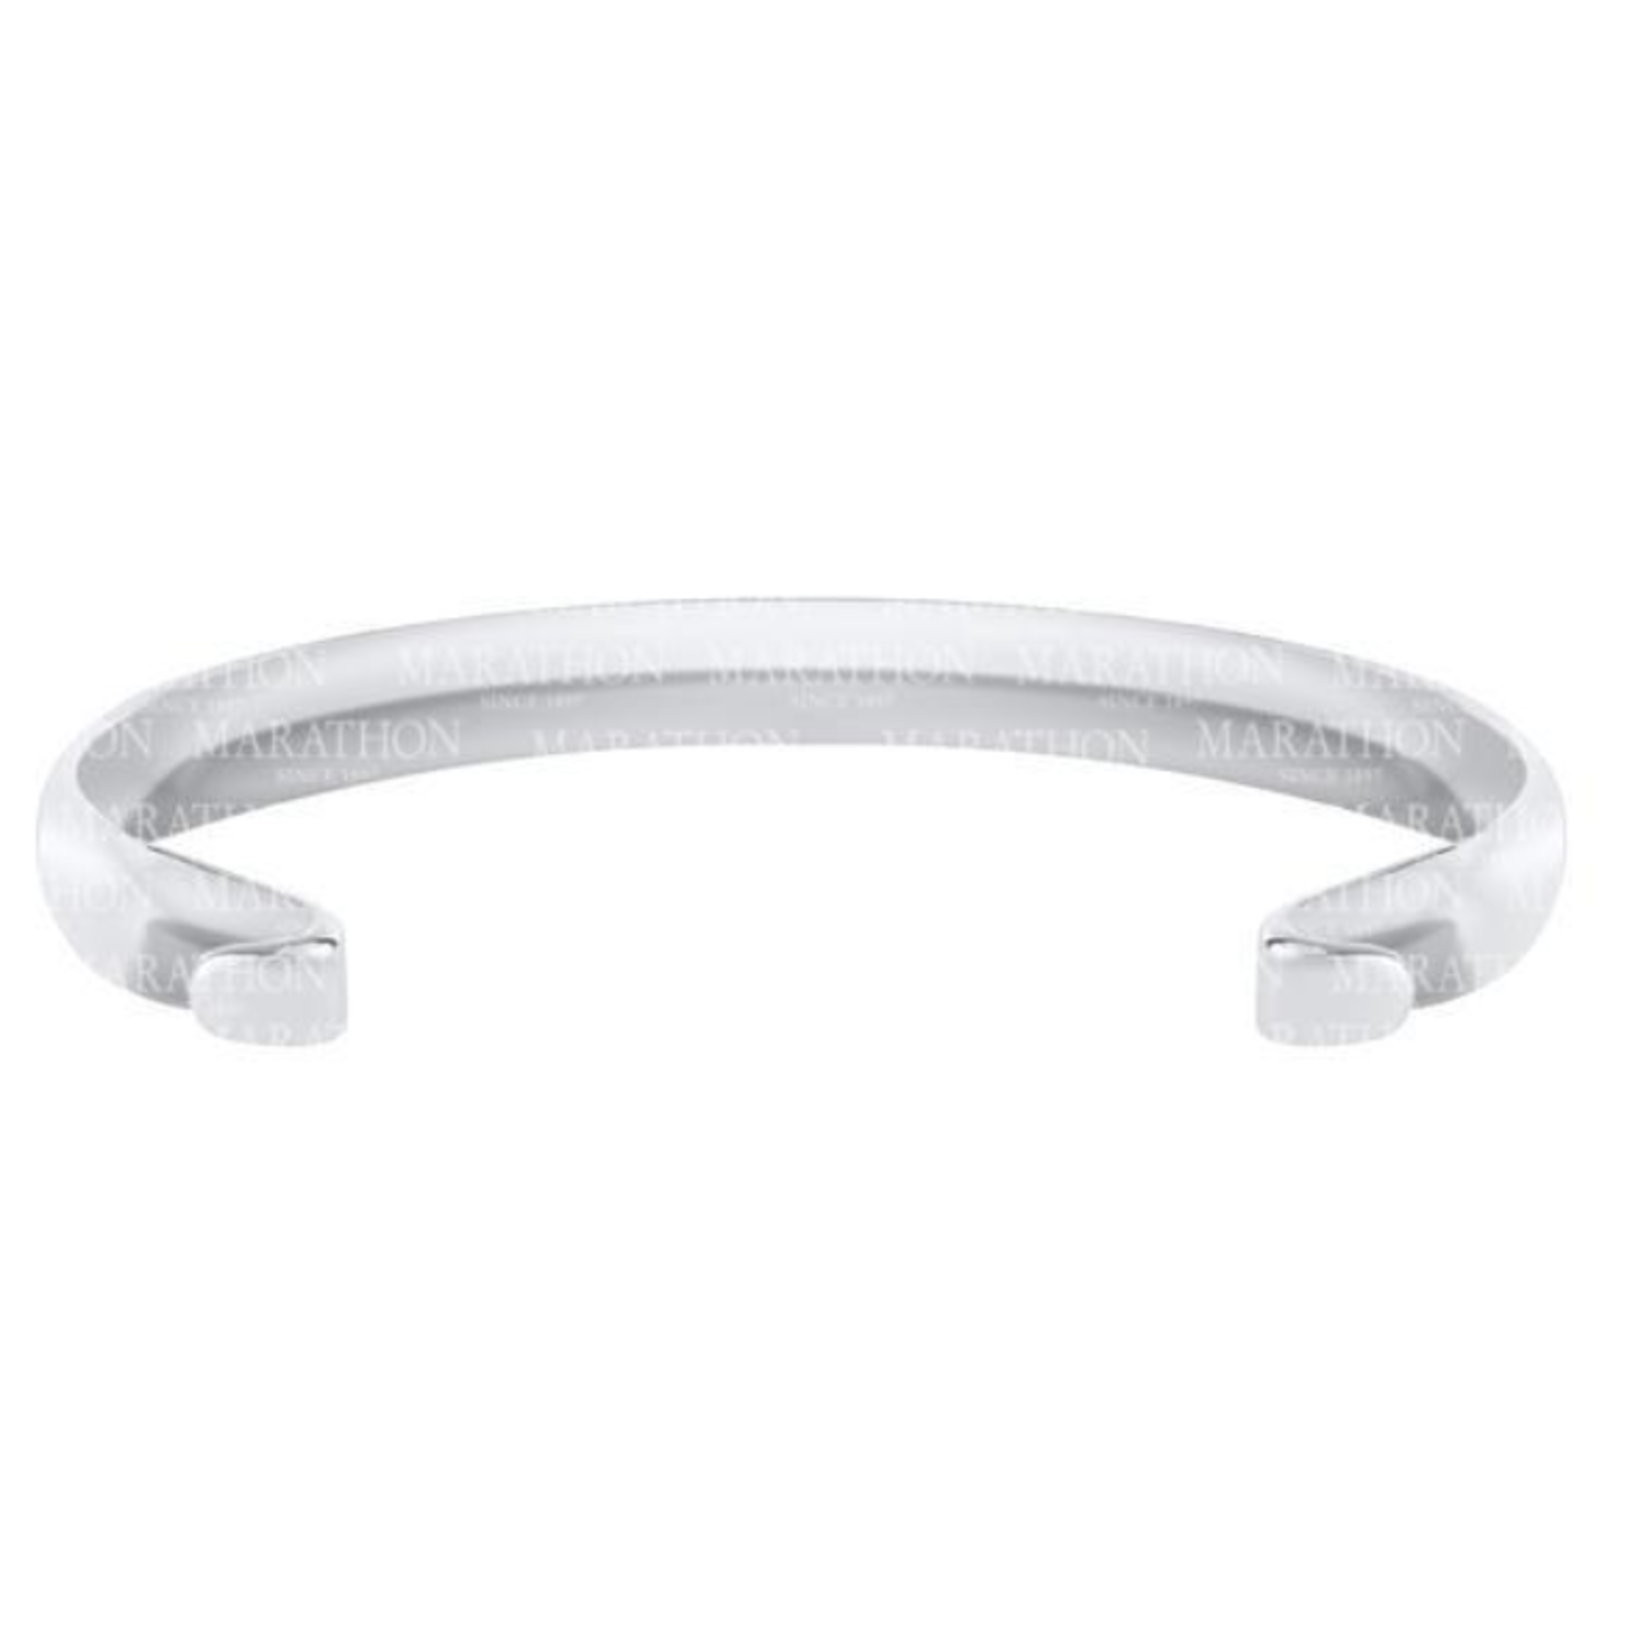 Lestage Sterling Silver Convertible Narrow Bracelet  6.5 inch